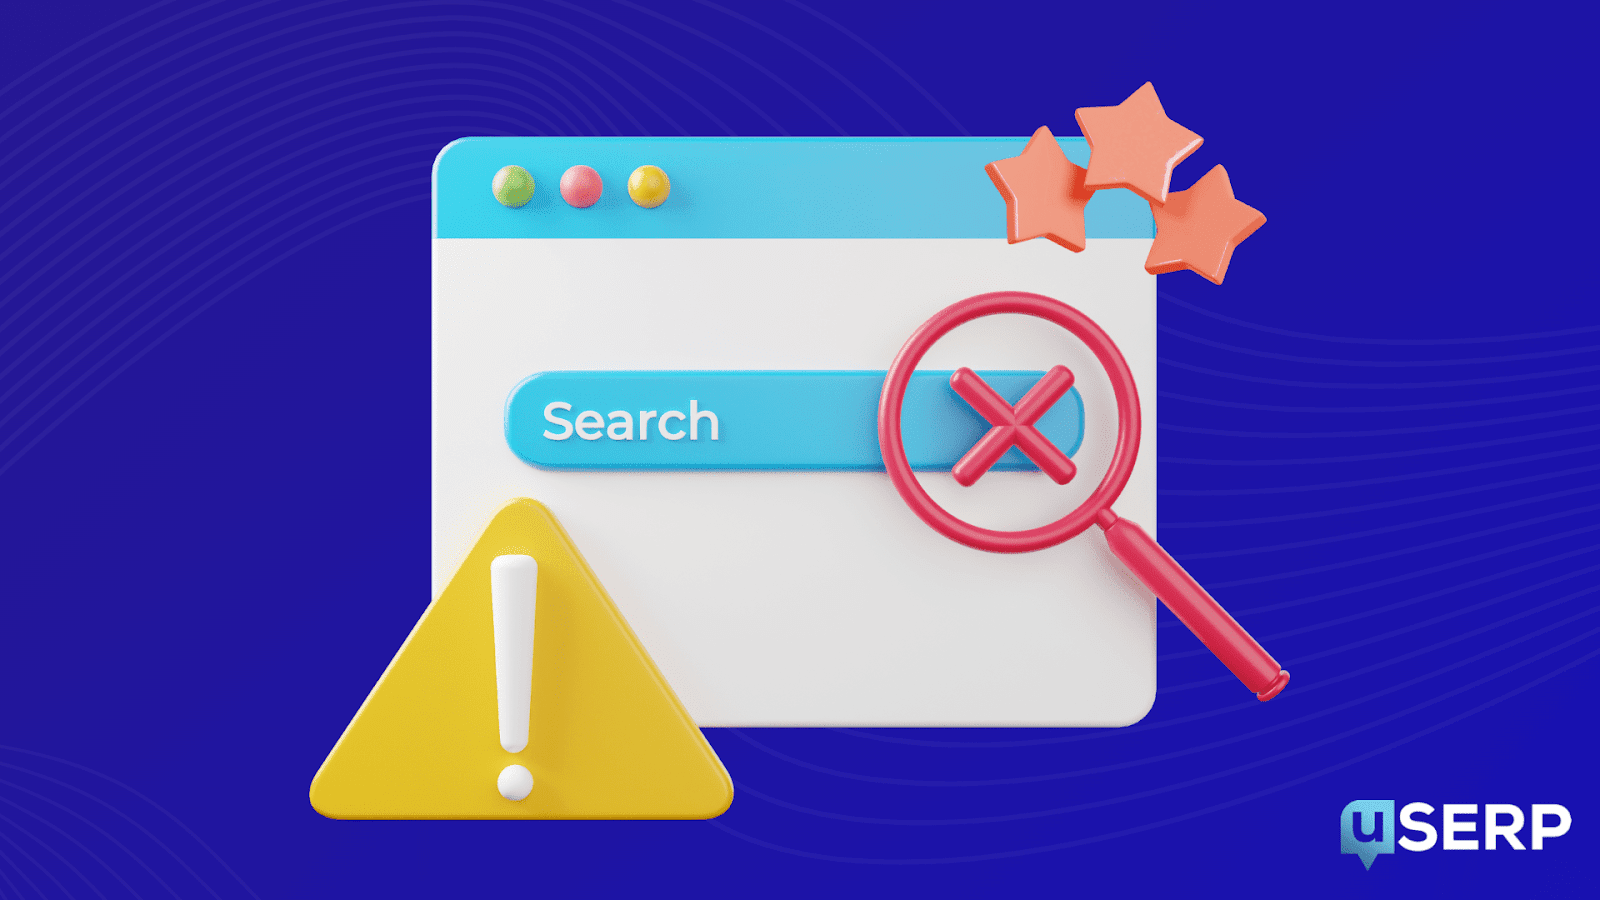 Link farming may ban your site from search engines